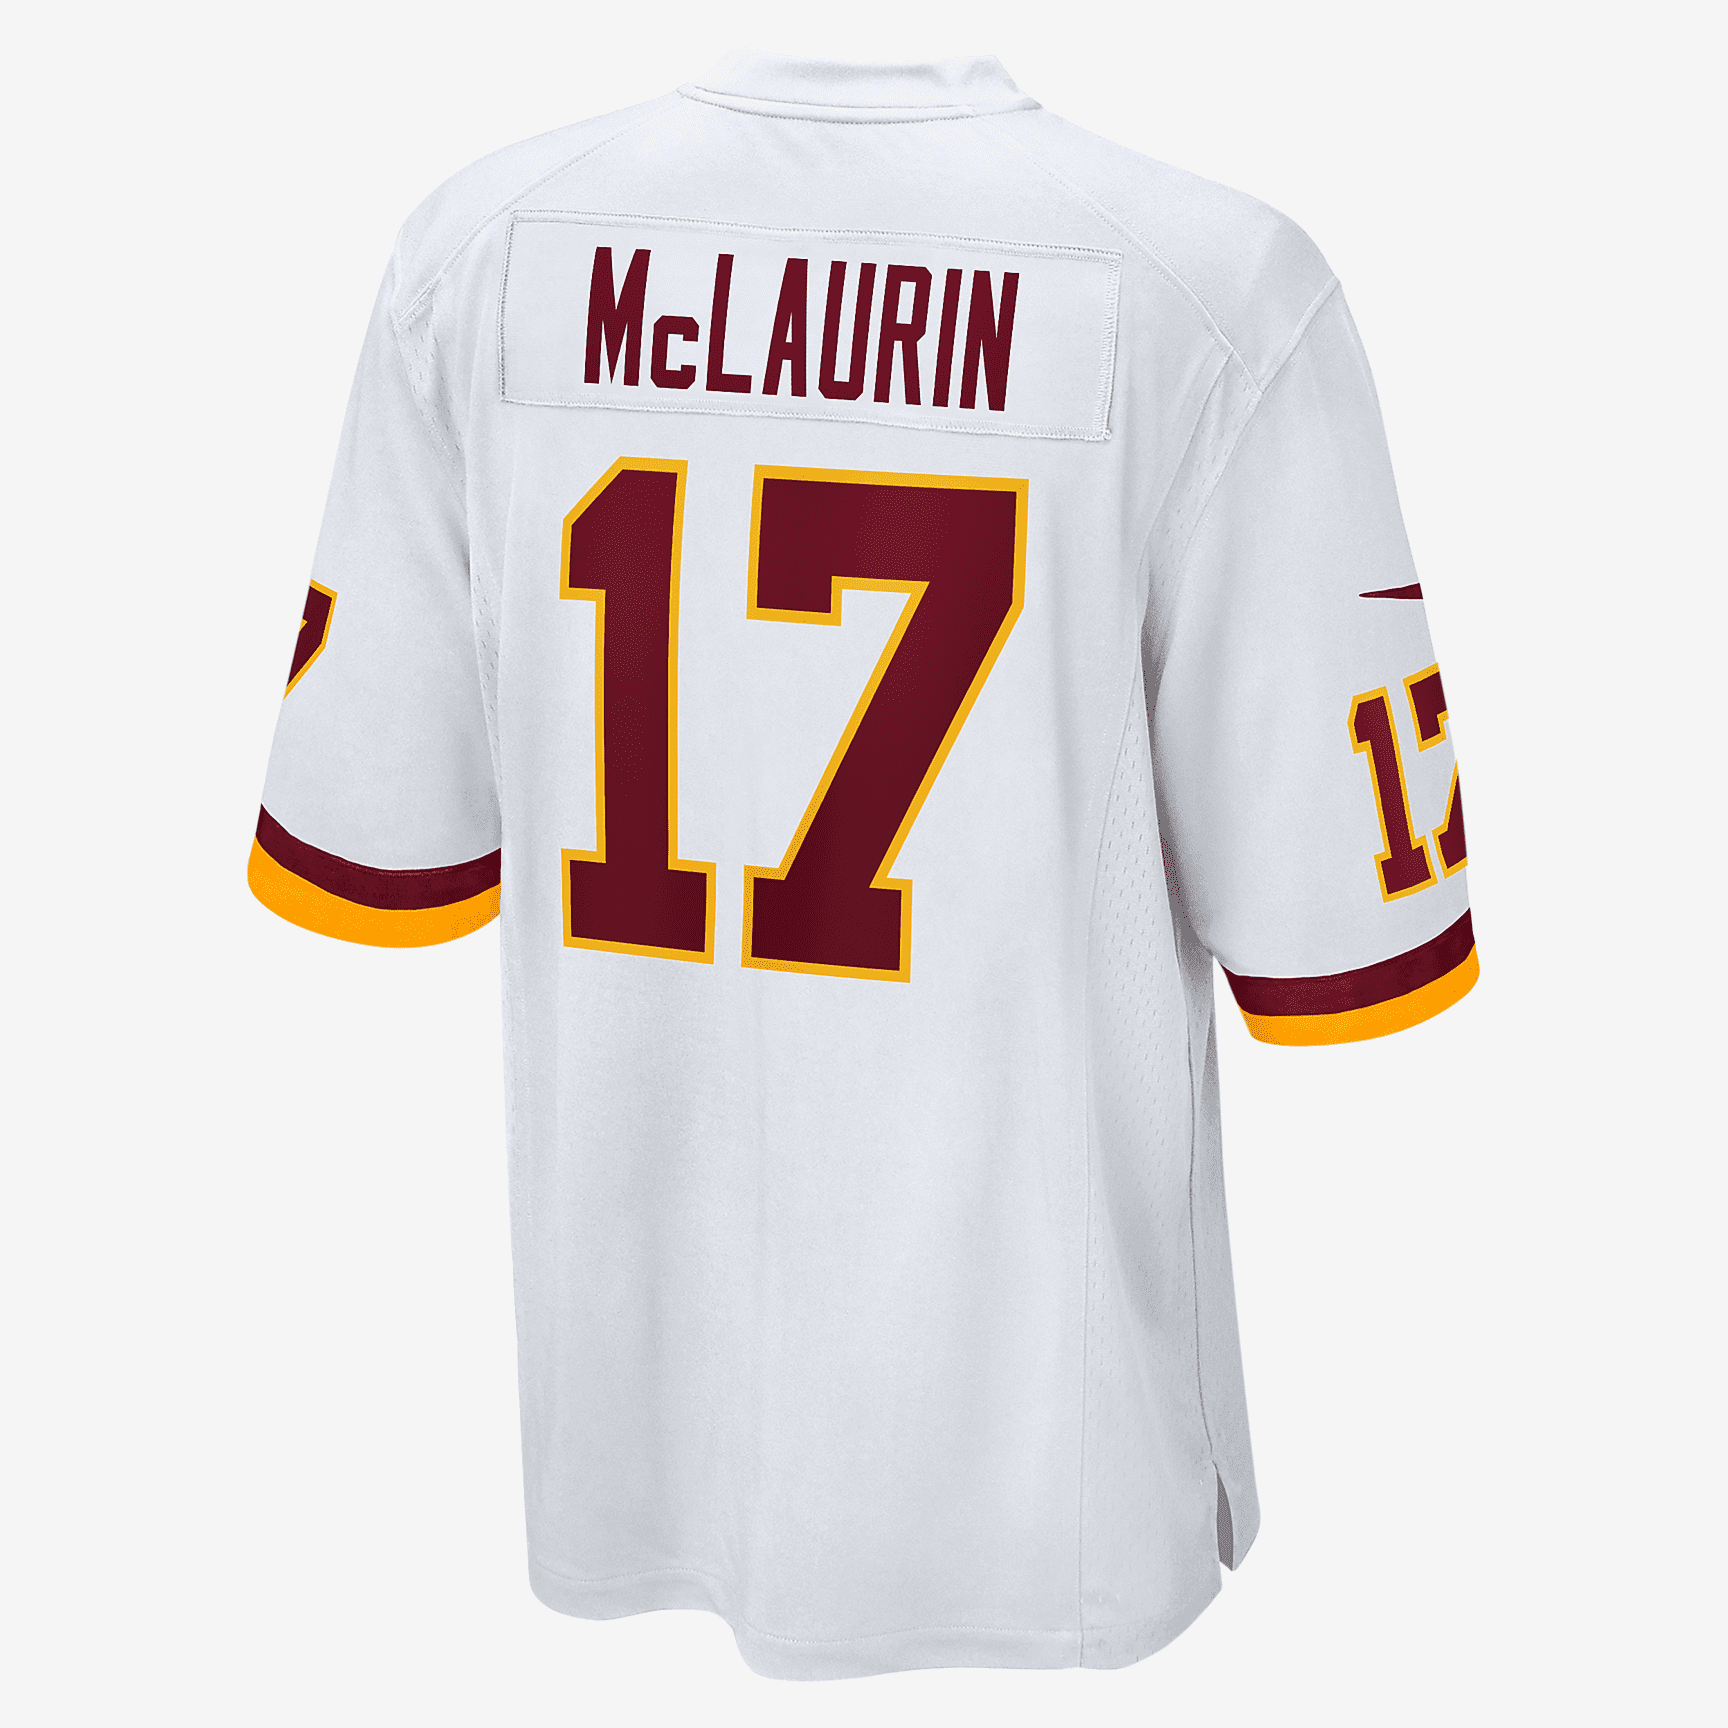 NFL Washington Commanders (Terry McLaurin) Men's Game Football Jersey –  ProThreads